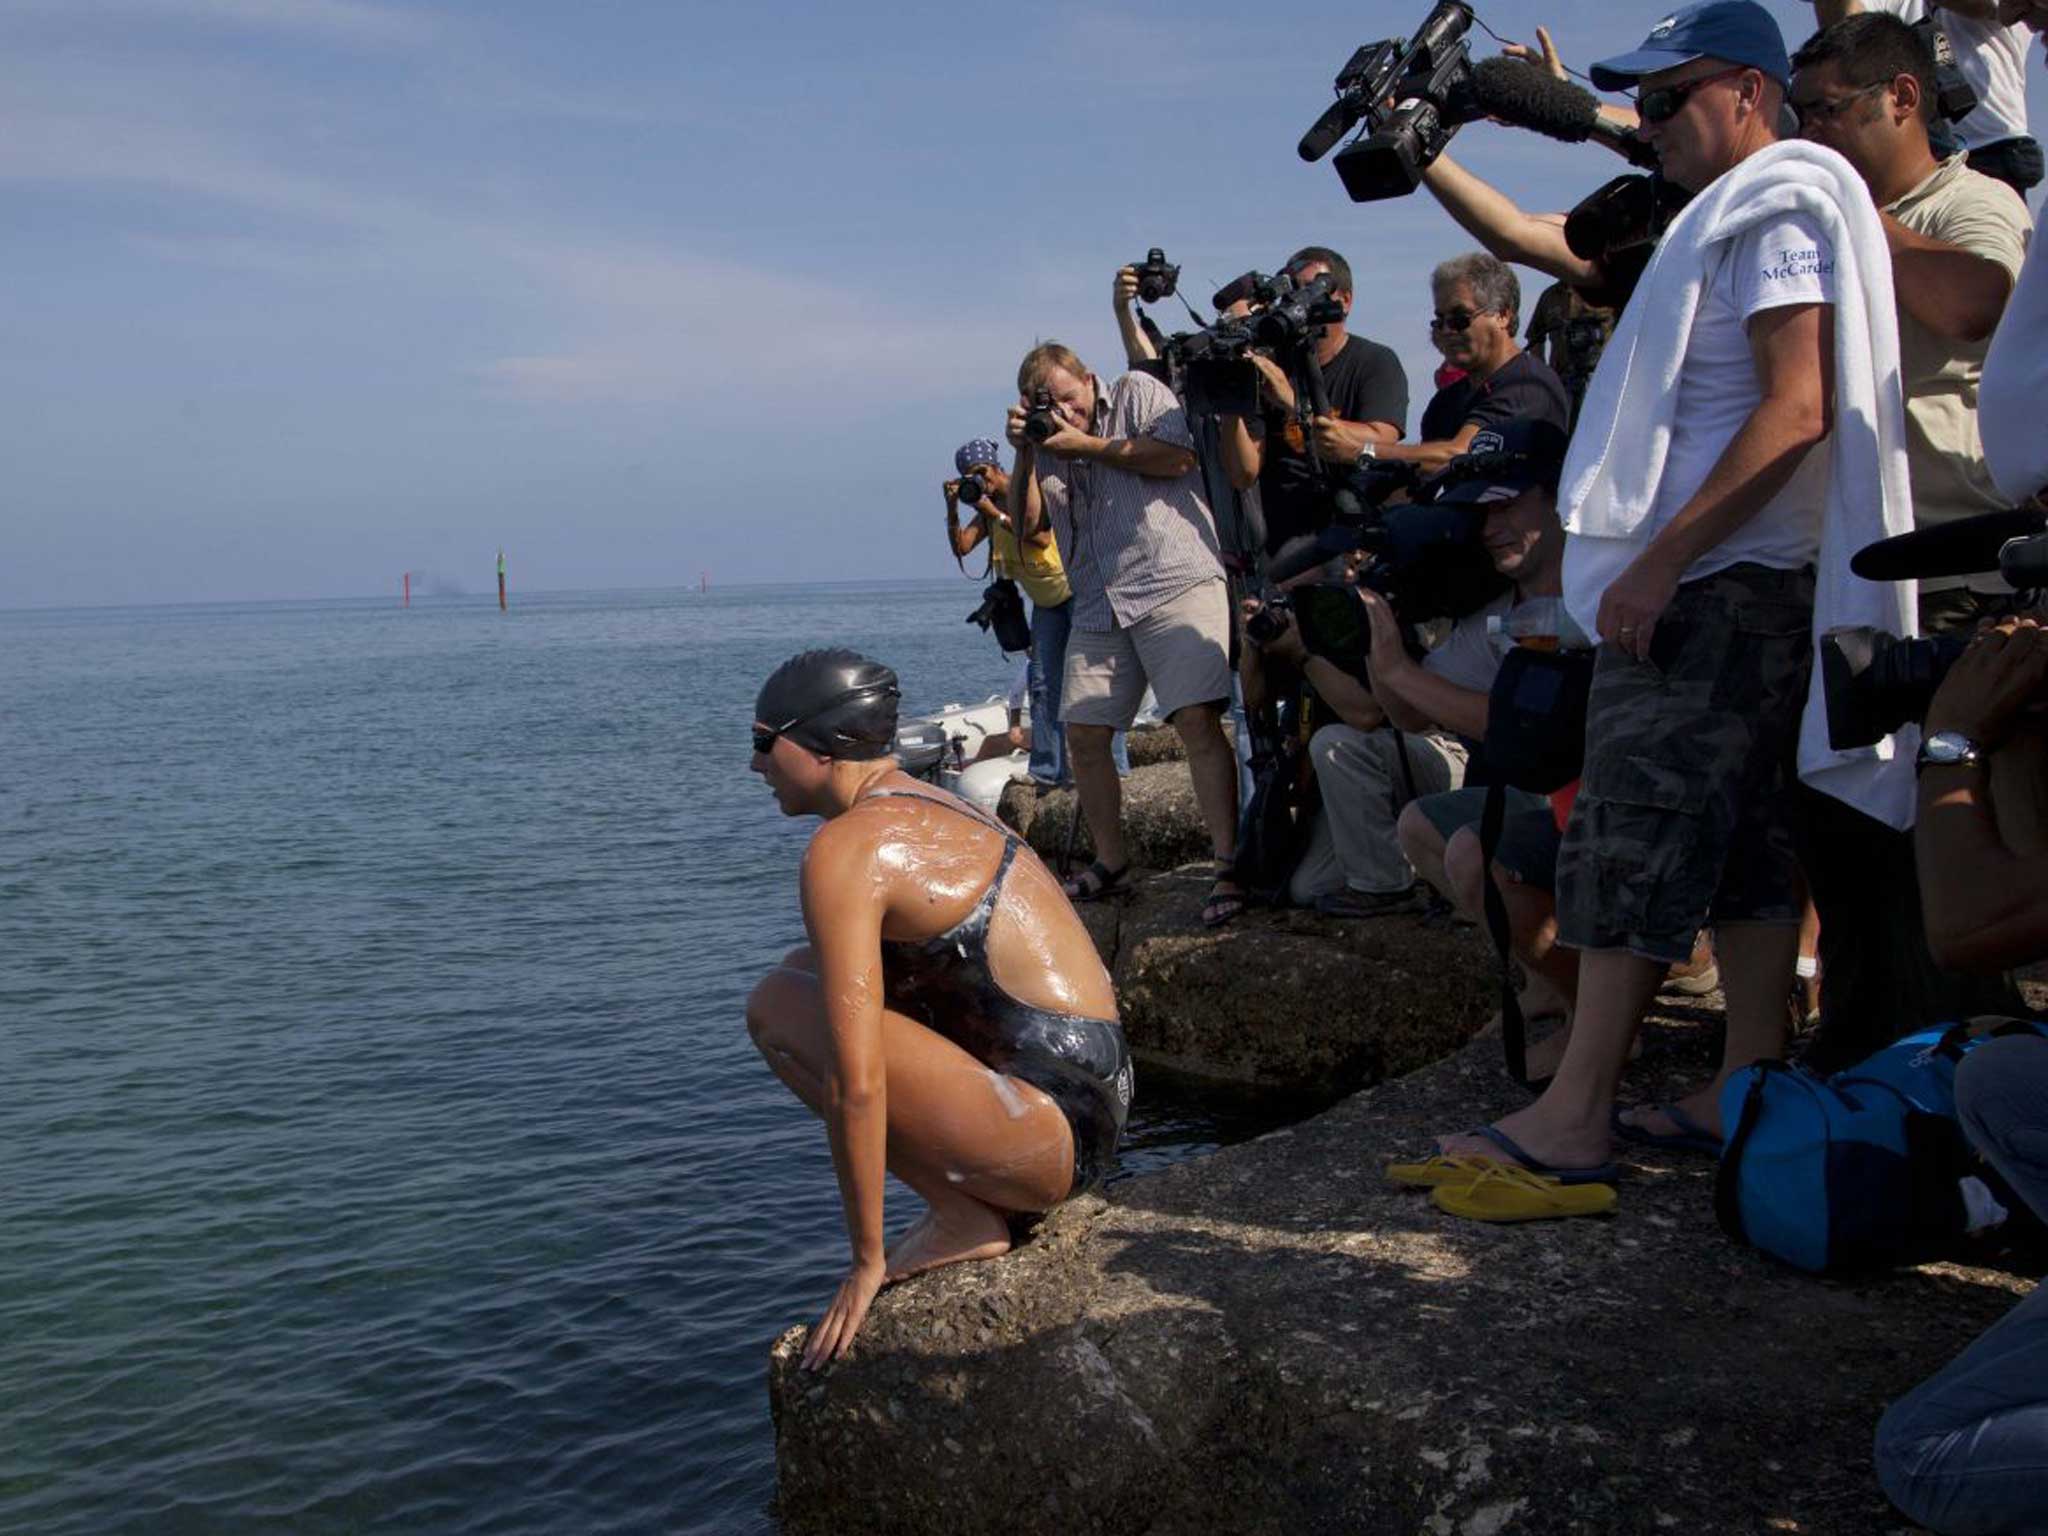 Australian endurance swimmer Chloe McCardel ended her attempt to swim from Cuba to Florida